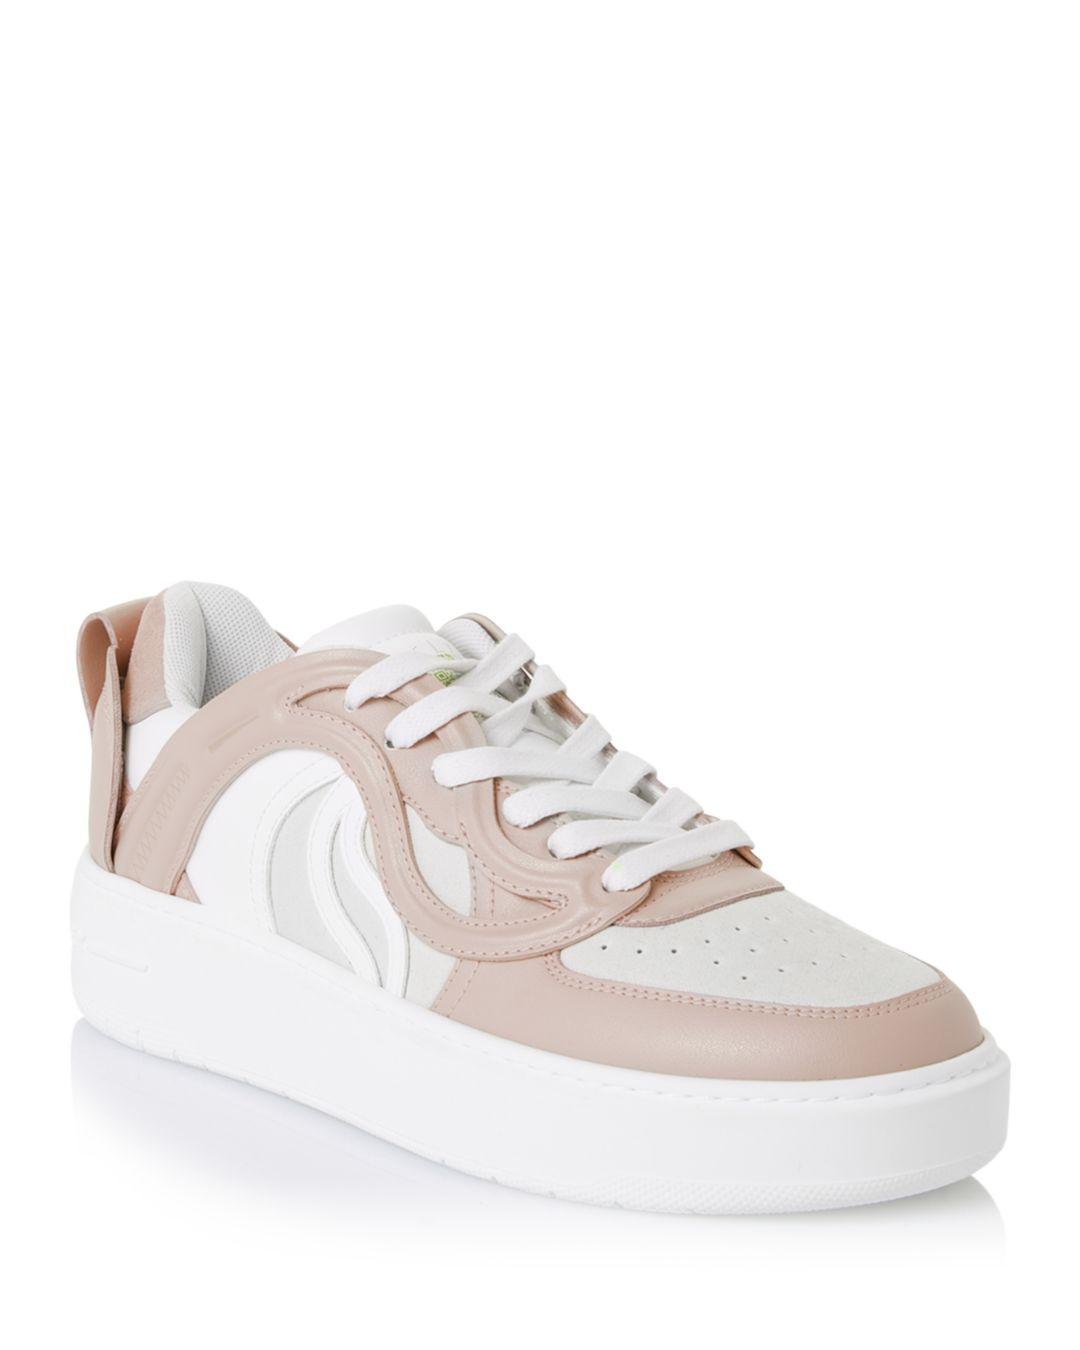 Stella McCartney S - Wave 1 Alter Lace Up Sneakers in White | Lyst